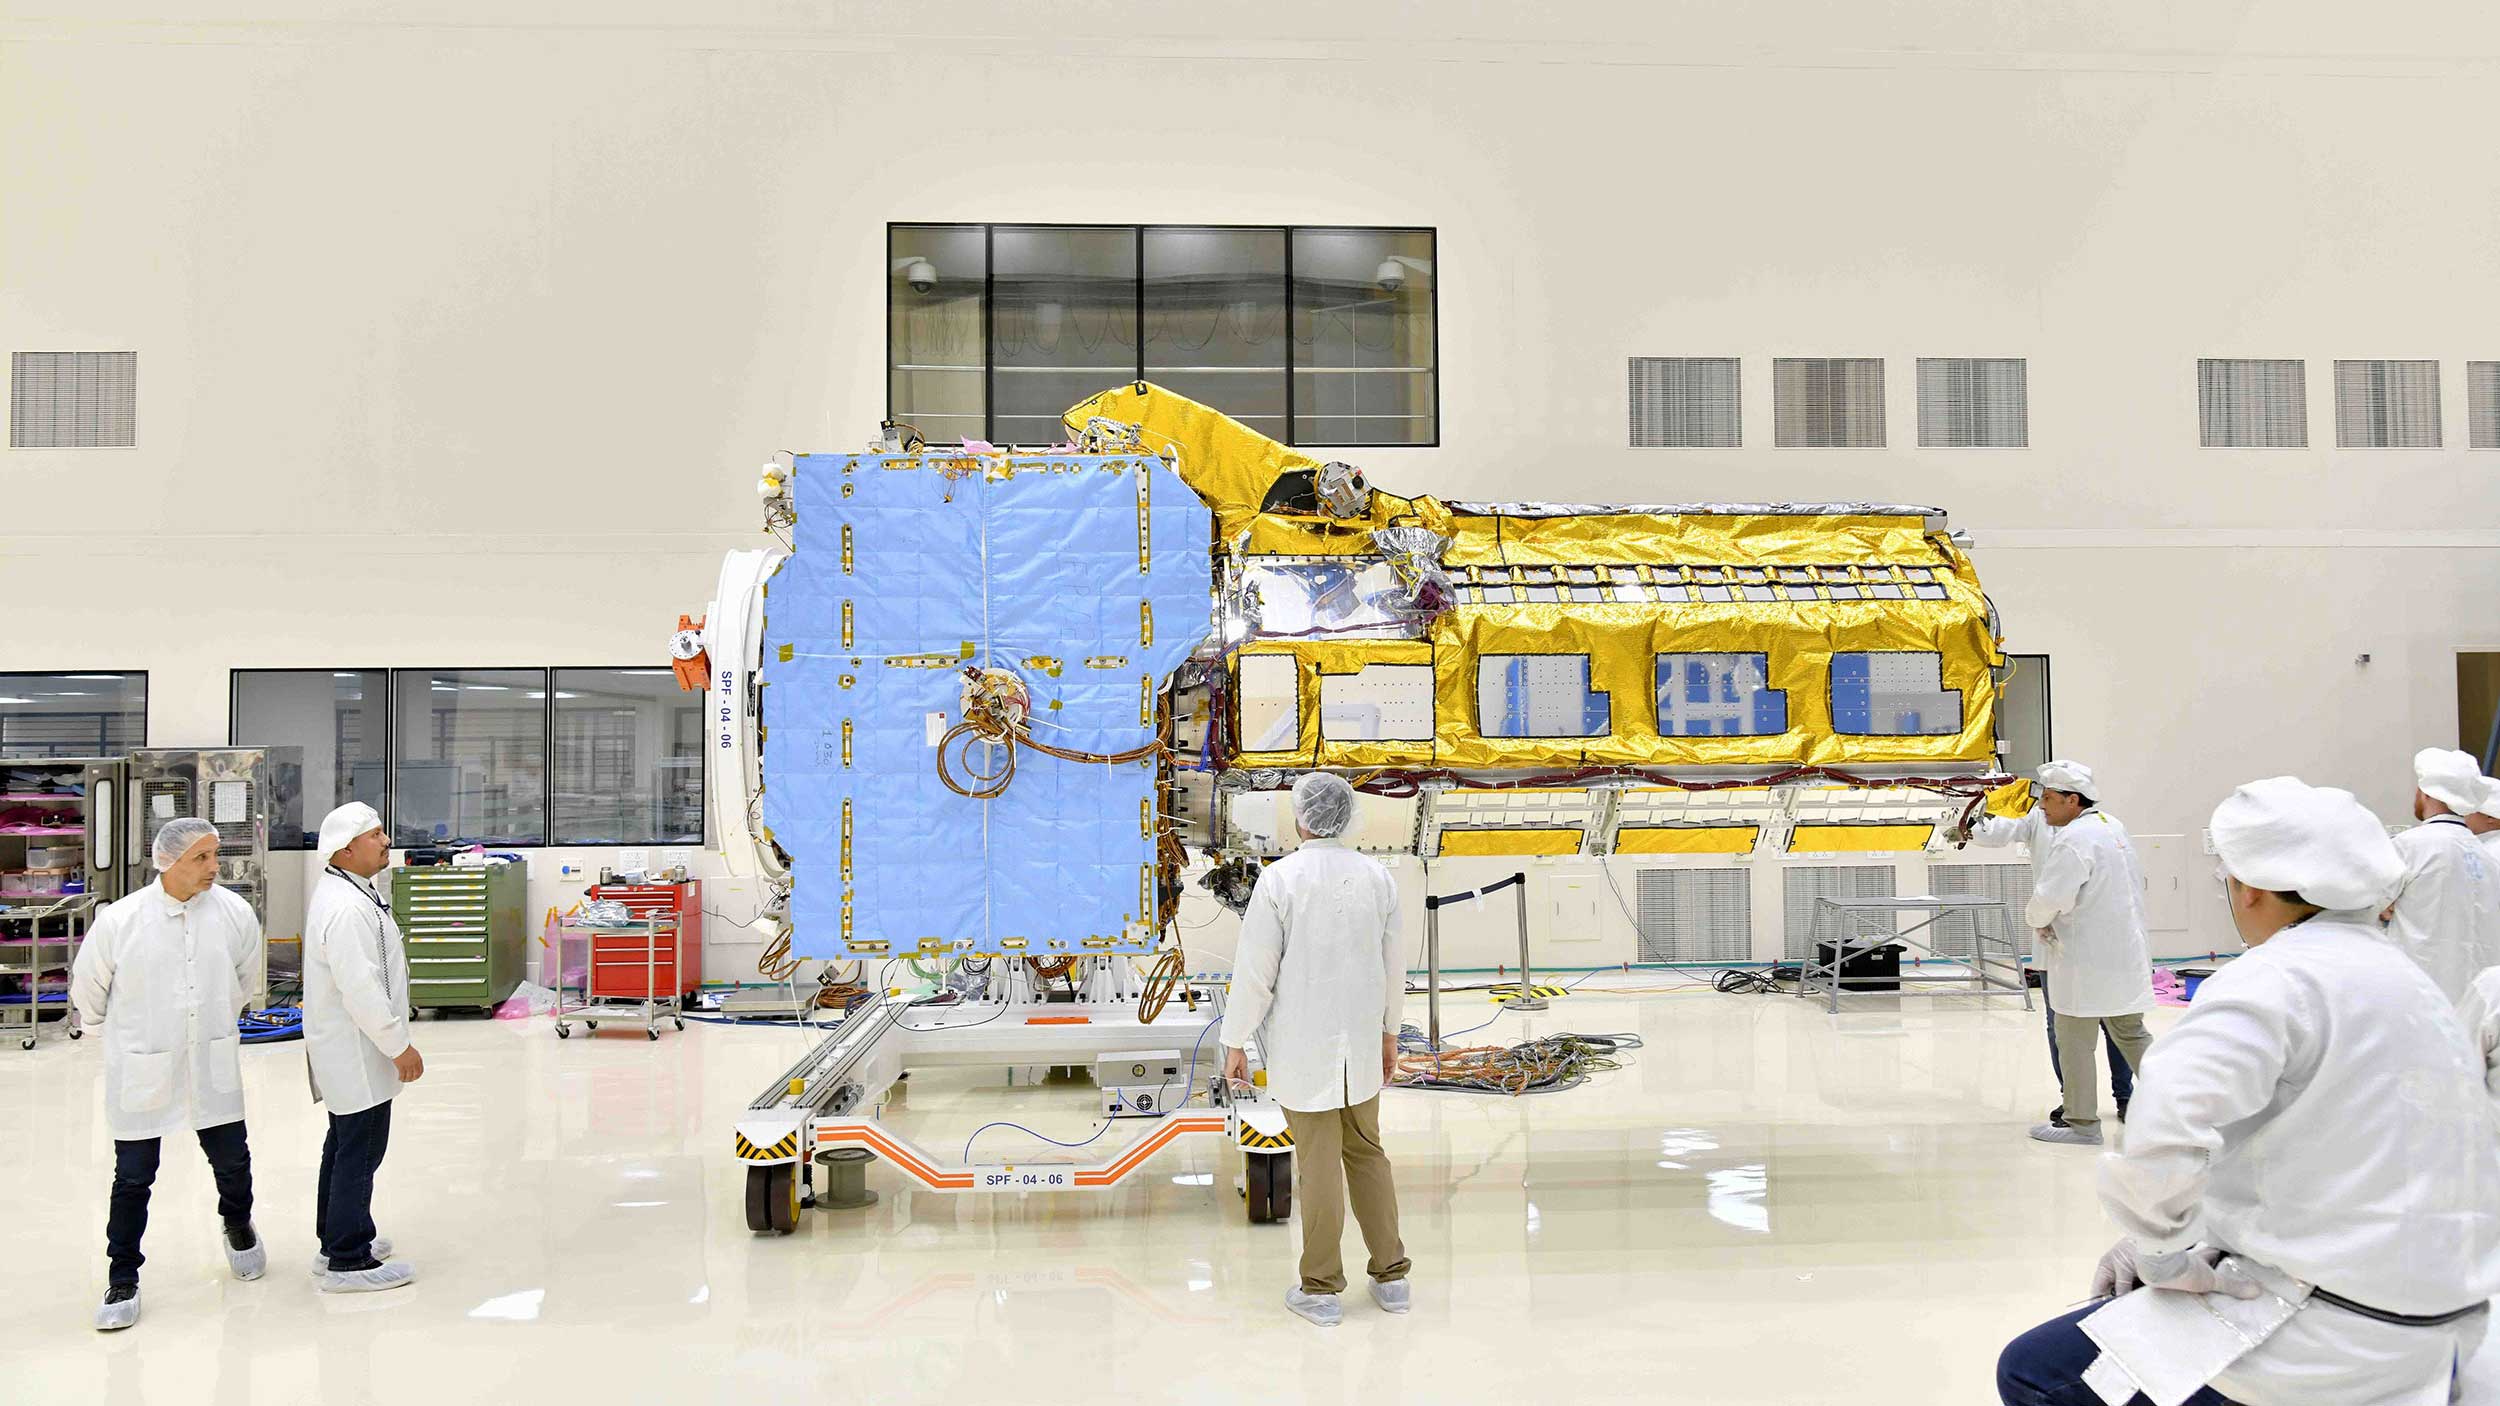 



Engineers joined the two main components of NISAR – the spacecraft bus and the radar instrument payload – in an ISRO clean room in Bengaluru, India, in June. The payload arrived from NASA’s Jet Propulsion Laboratory in Southern California in March, while the bus was built at the ISRO facility.

Credit: Credit: VDOS-URSC 


